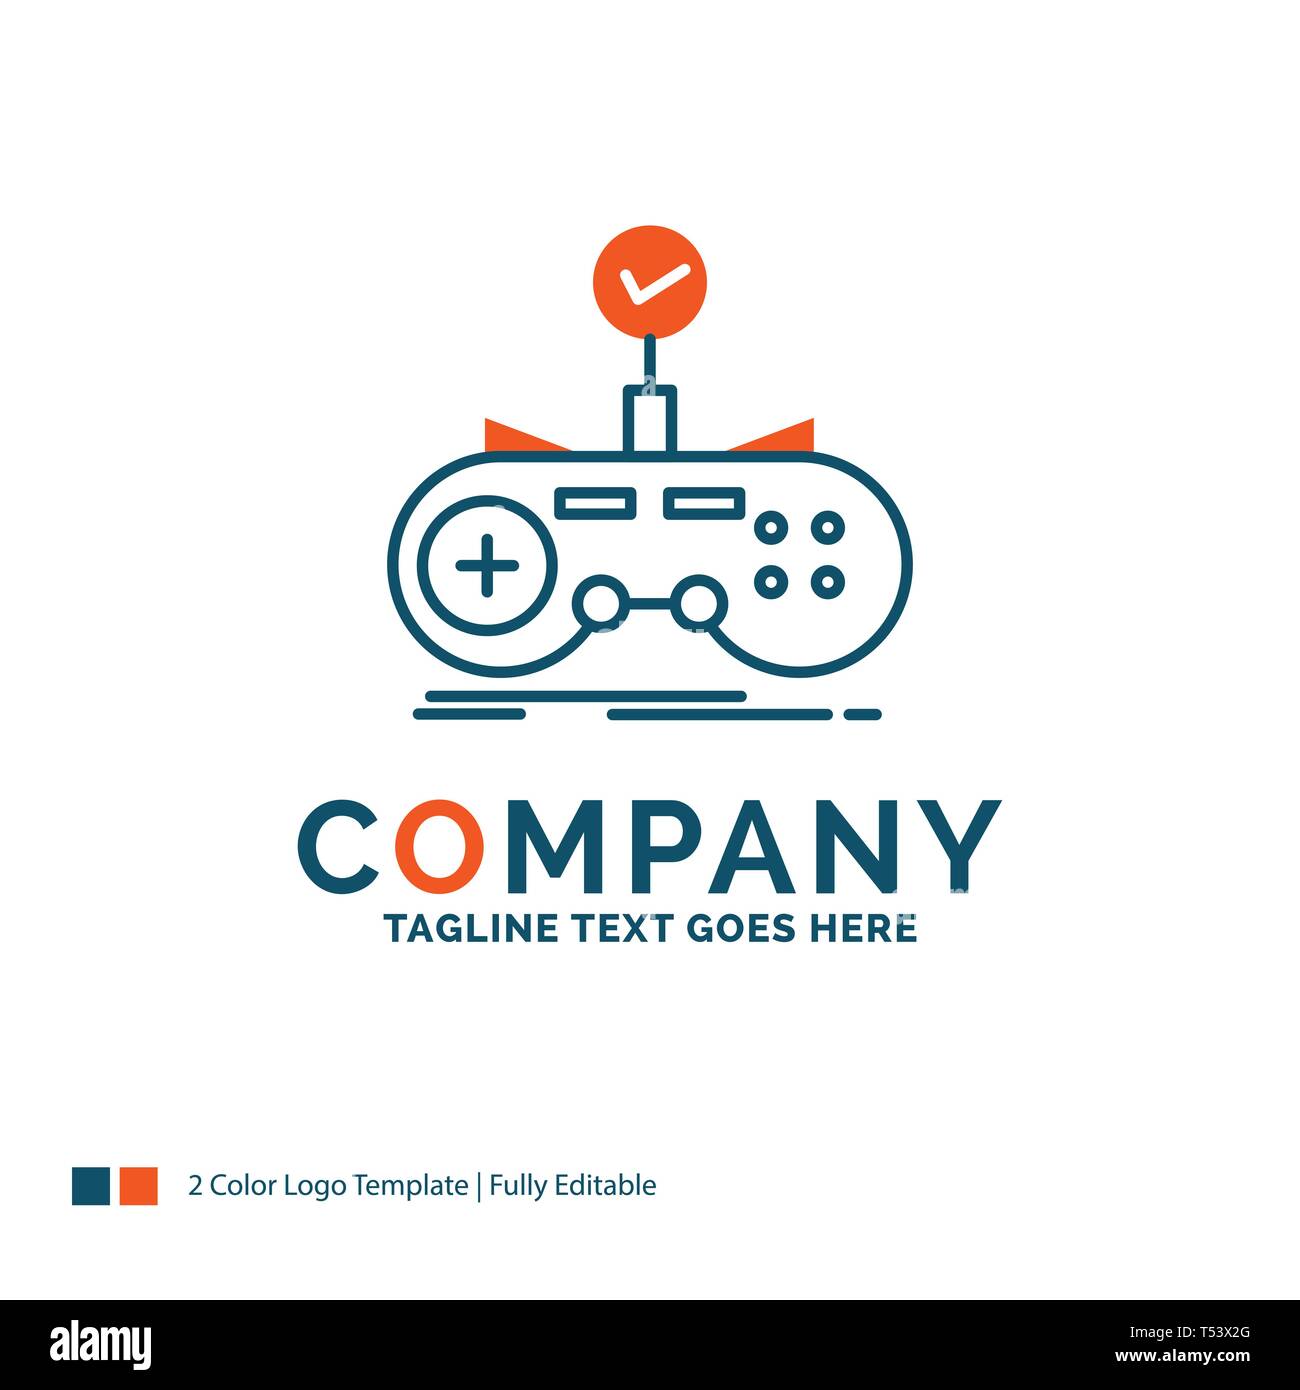 Gaming Logo Images – Browse 847,994 Stock Photos, Vectors, and